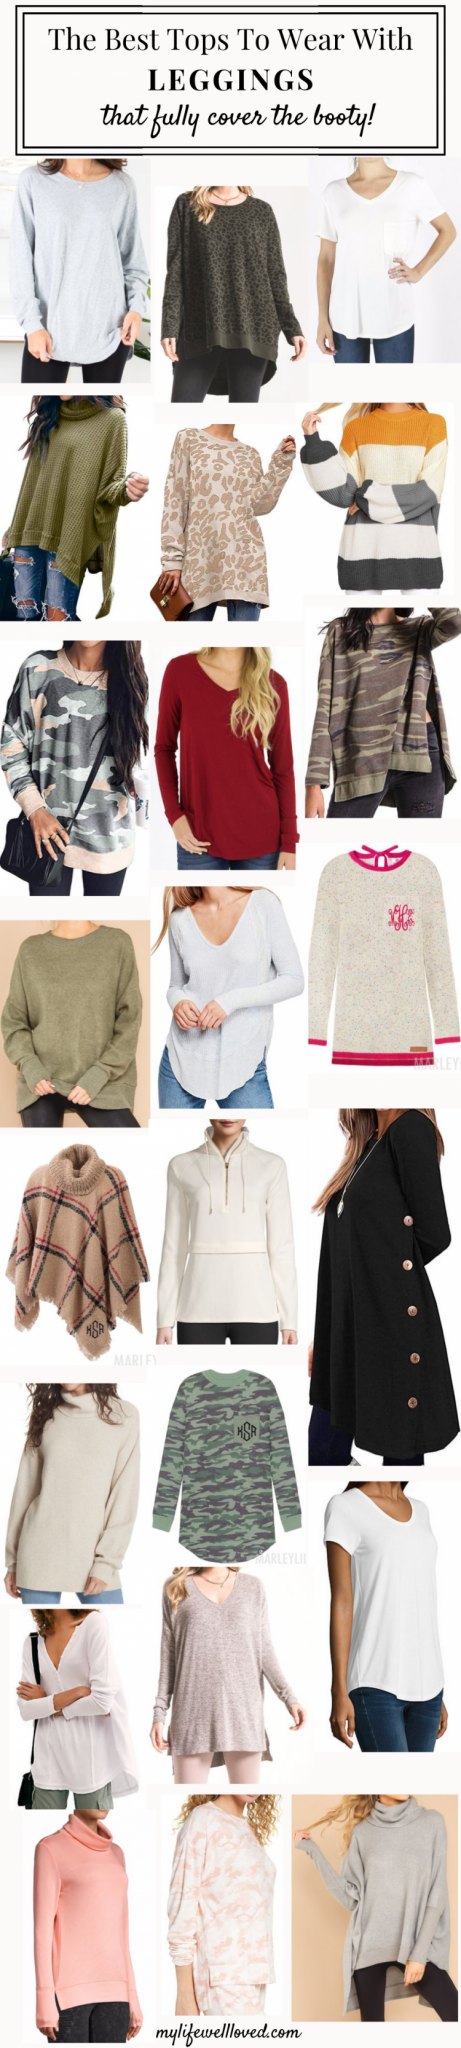 Top 27 Best Tops To Wear With Leggings This Fall - Healthy By Heather Brown